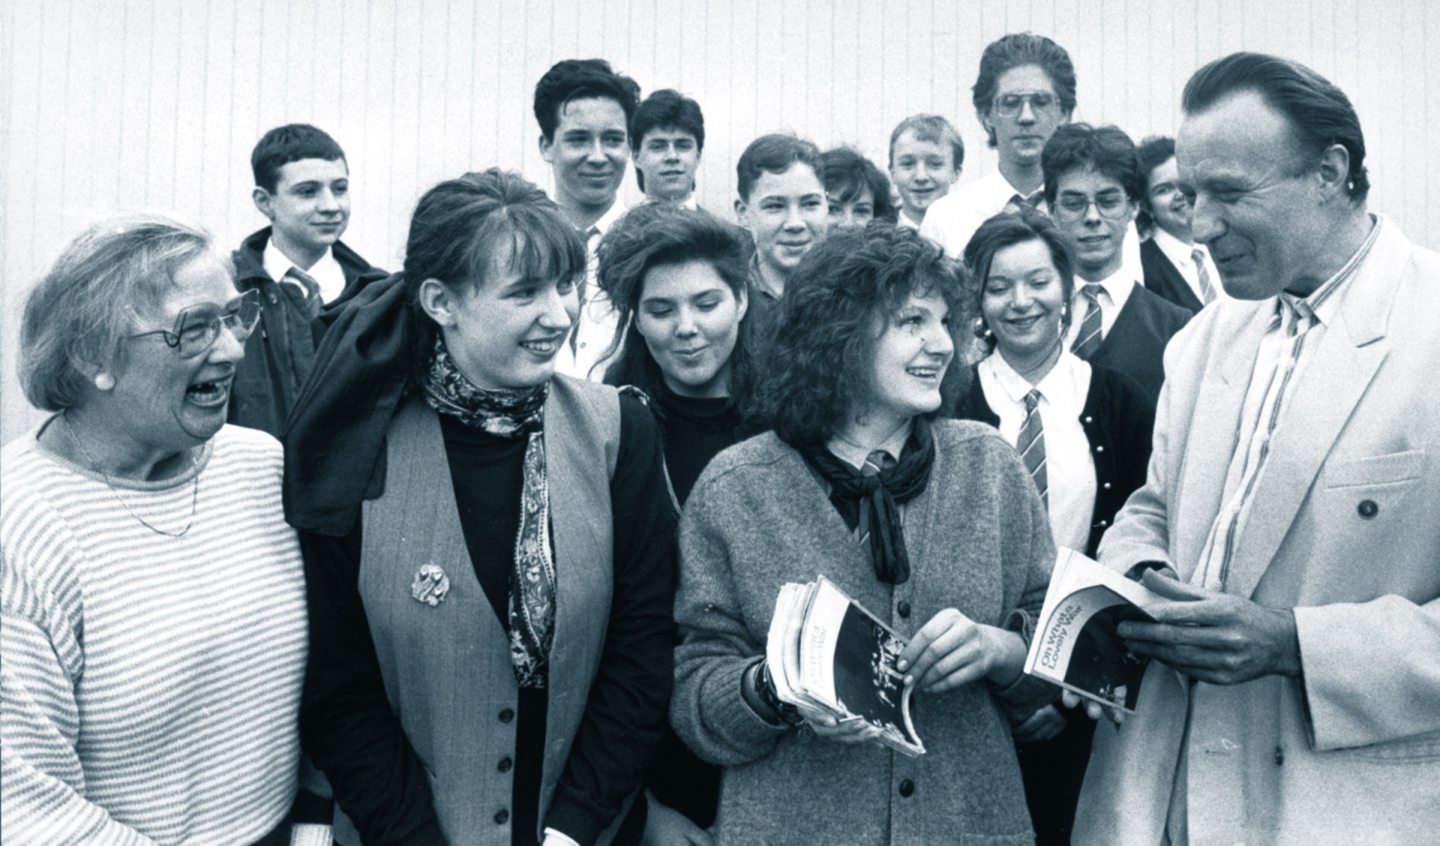  Actor and former pupil Malcolm Rennie with speech, drama and media studies pupils at Aberdeen Grammar School in 1989.